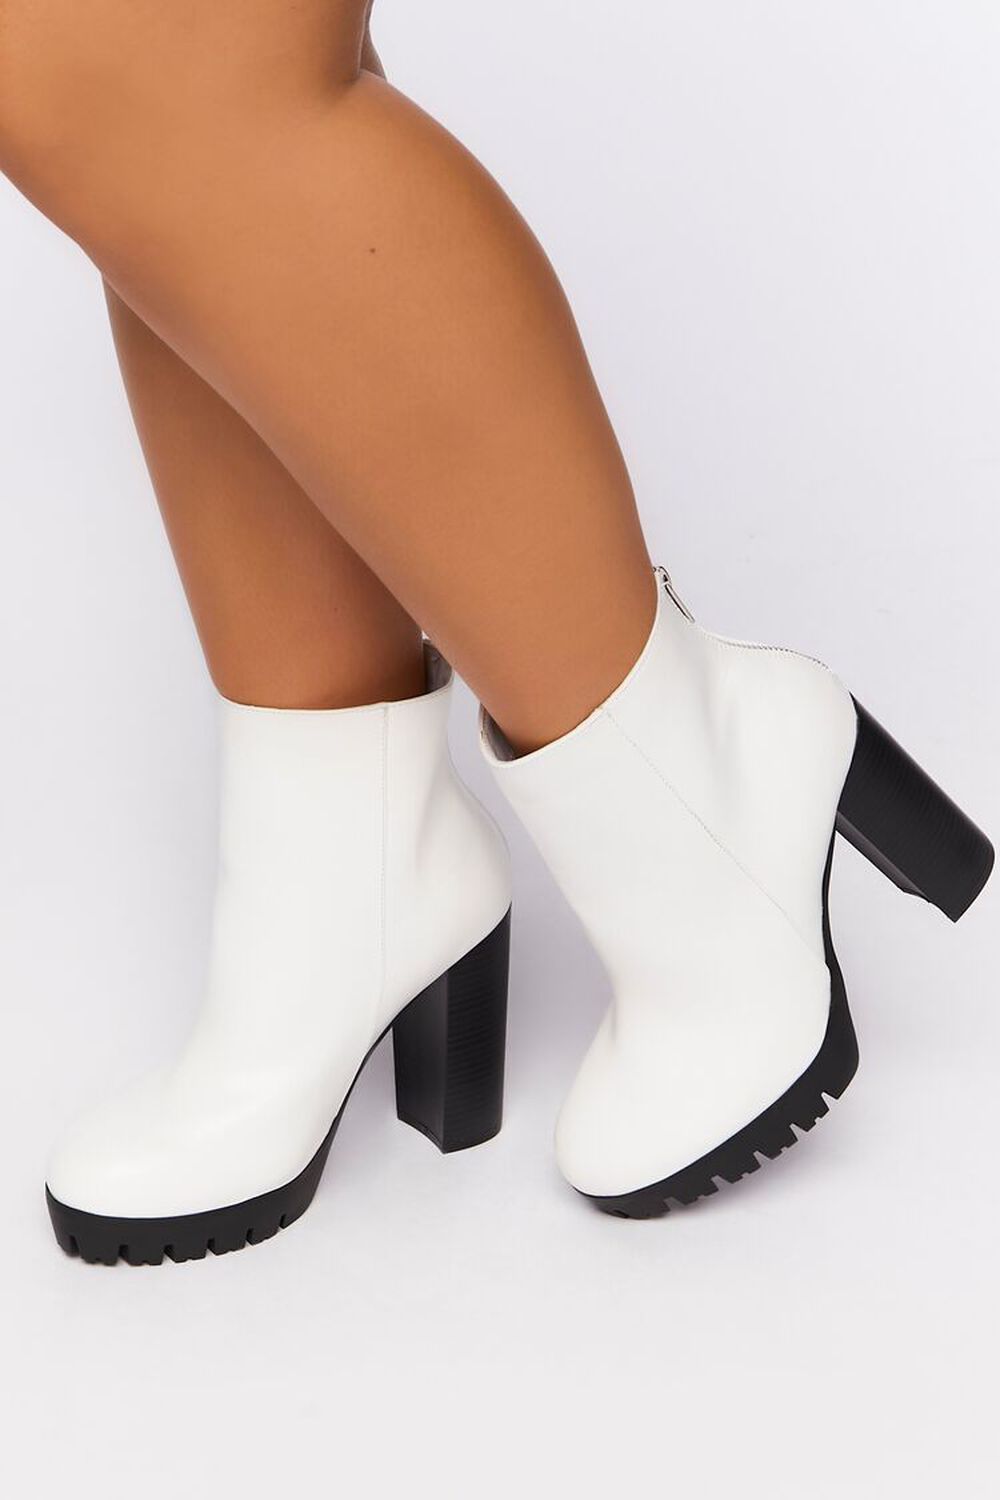 WHITE Contrast-Lug Booties (Wide), image 1